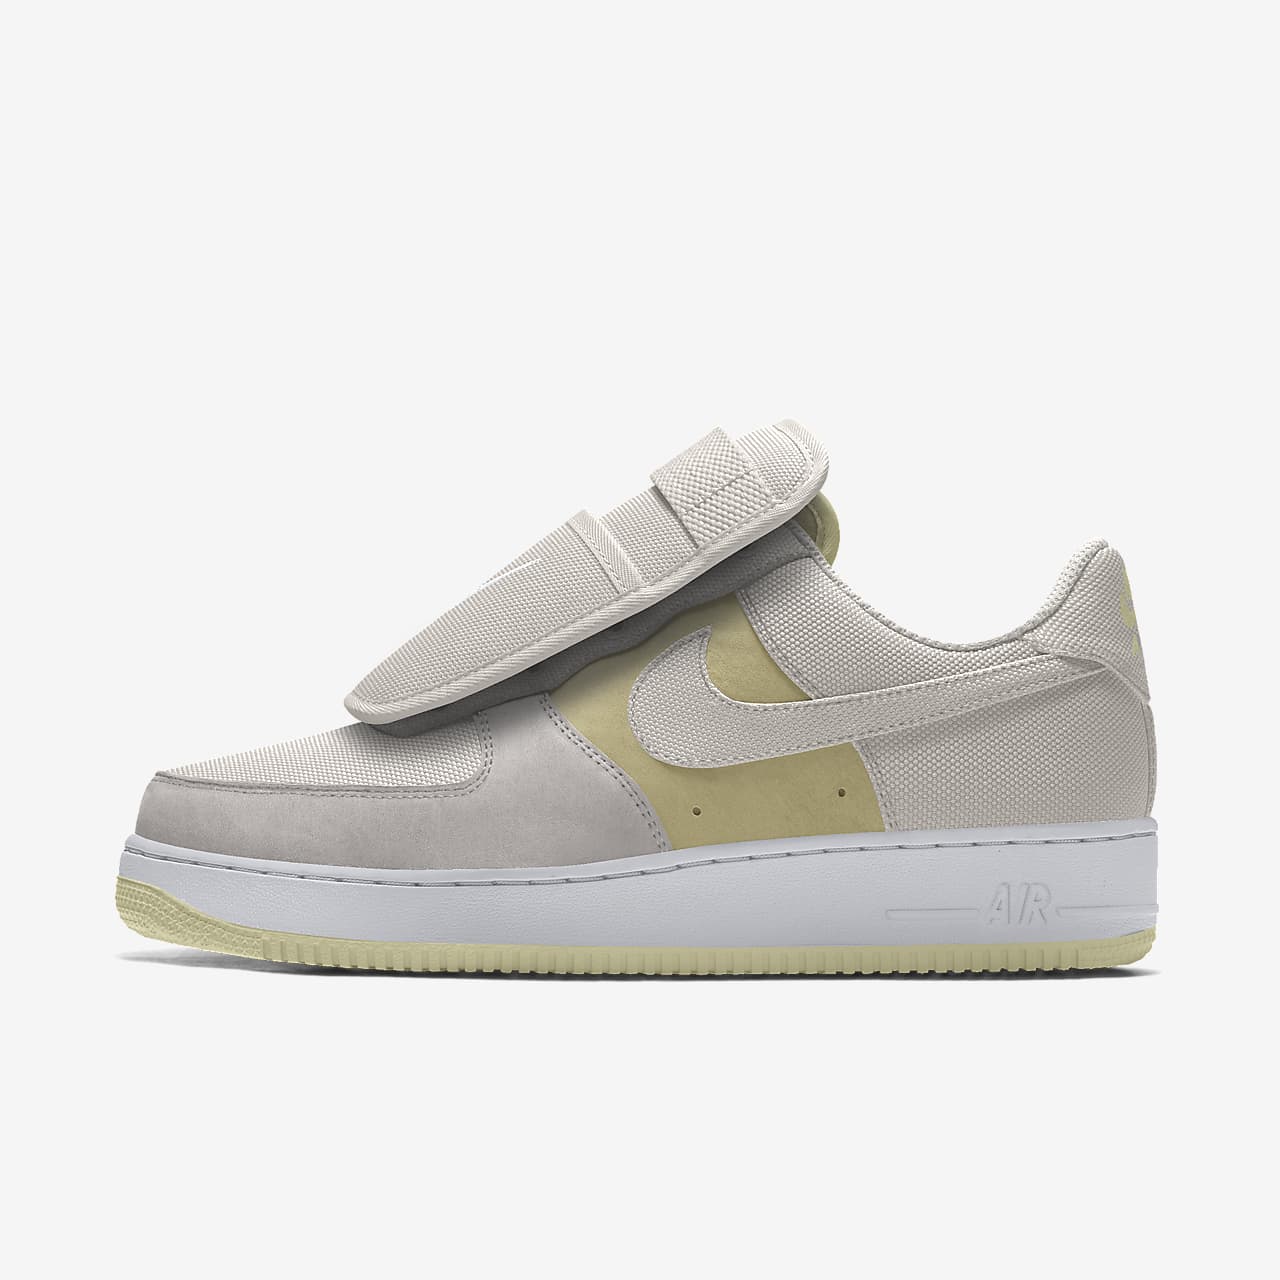 Indirect kleding magie Nike Air Force 1 Low Unlocked By You Custom Men's Shoes. Nike.com